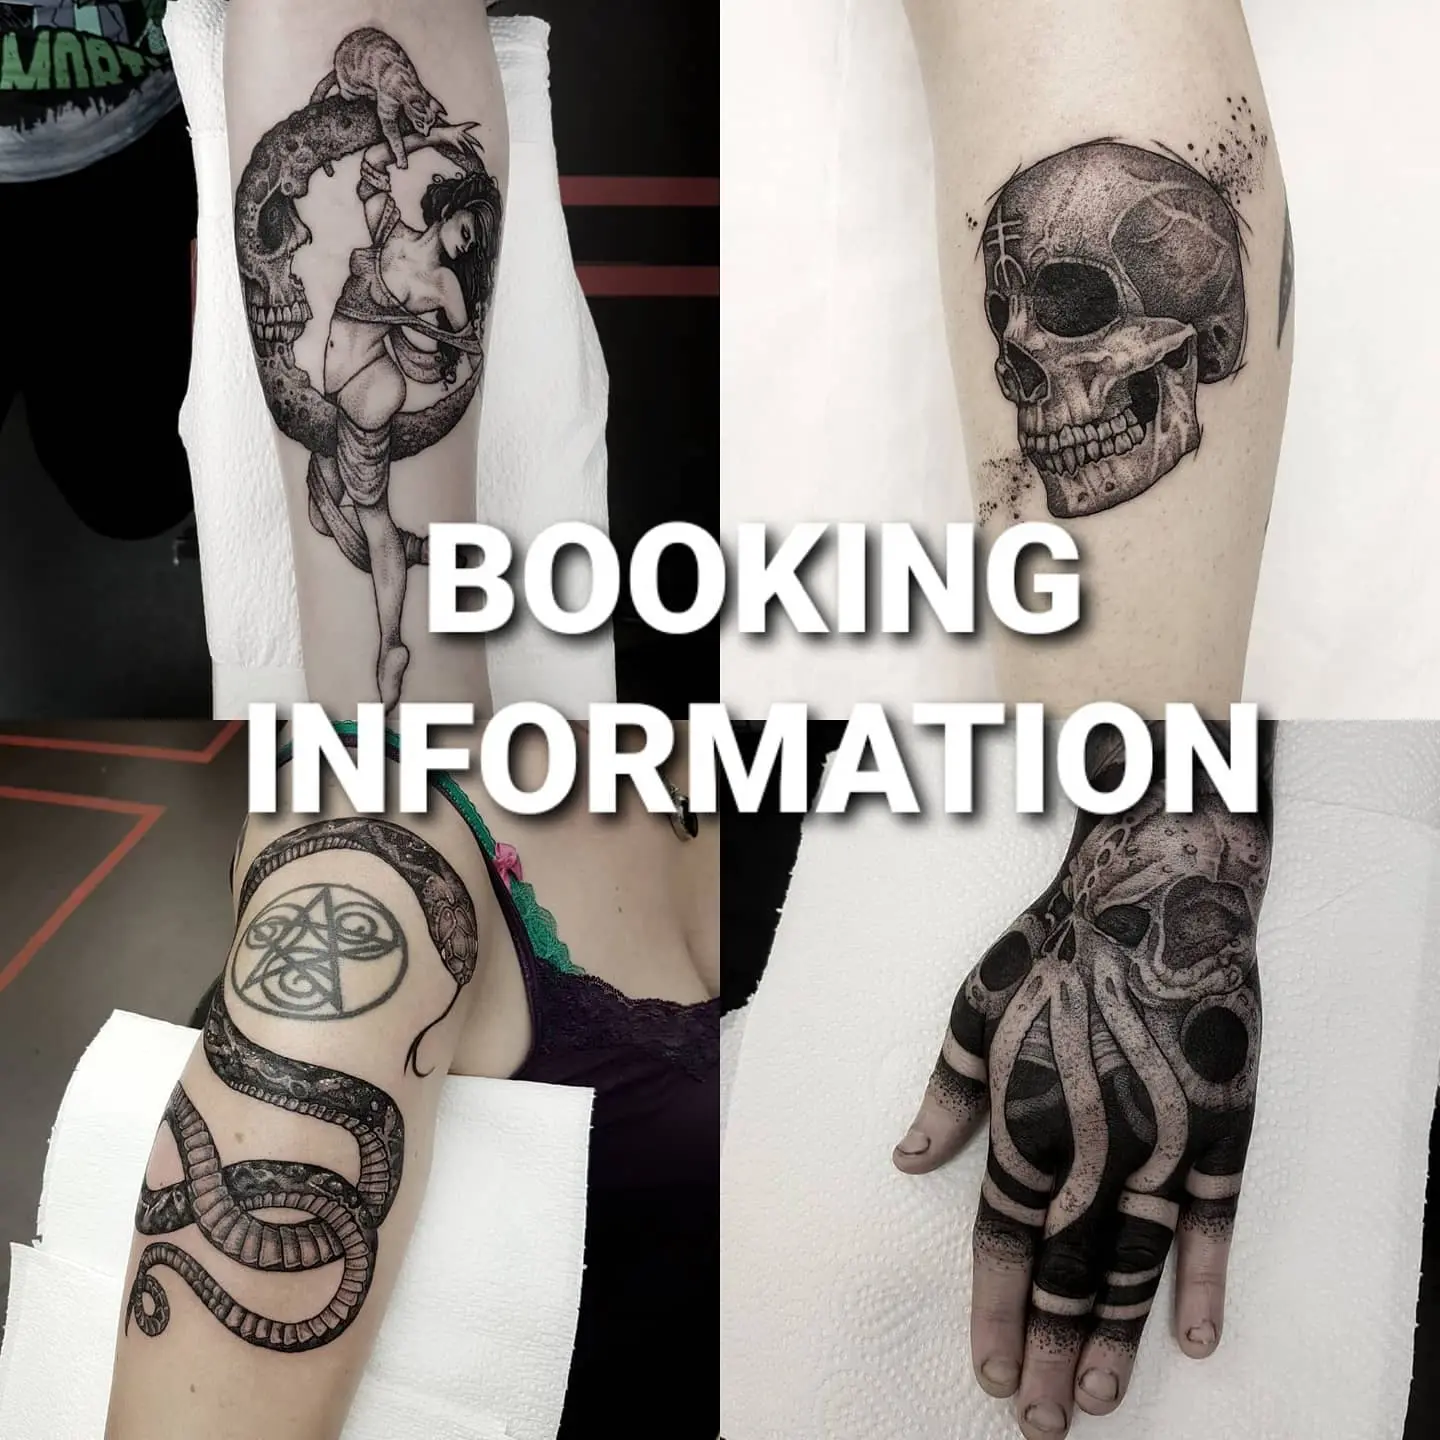 ***New bookings info*** first of all, thanks to everyone who has been in touch the last few months 🖤 I'm starting email consultations from tomorrow for new appointments, and the studio will start booking these in from April 26th! If you want to book in, email me at goatskullshirleygmail.com with the following info: design idea, with reference pics if you have any (max of four), placement and size(width and height in cm), a photo of the placement with a pen line outlining where you want the tattoo (as close to accurate in size as possible is super handy!). I'll get a timescale and quote figured out with you, and from the 26th, Studio XIII will get you all booked in! Dying to be back in the studio and getting back to work! 🖤💪🖤
.
.
.
.
.
.
.
.
                      thedarkestwork darkartists artesobscurae uktta wiccac stabmegod onlythedarkest blacktattooing